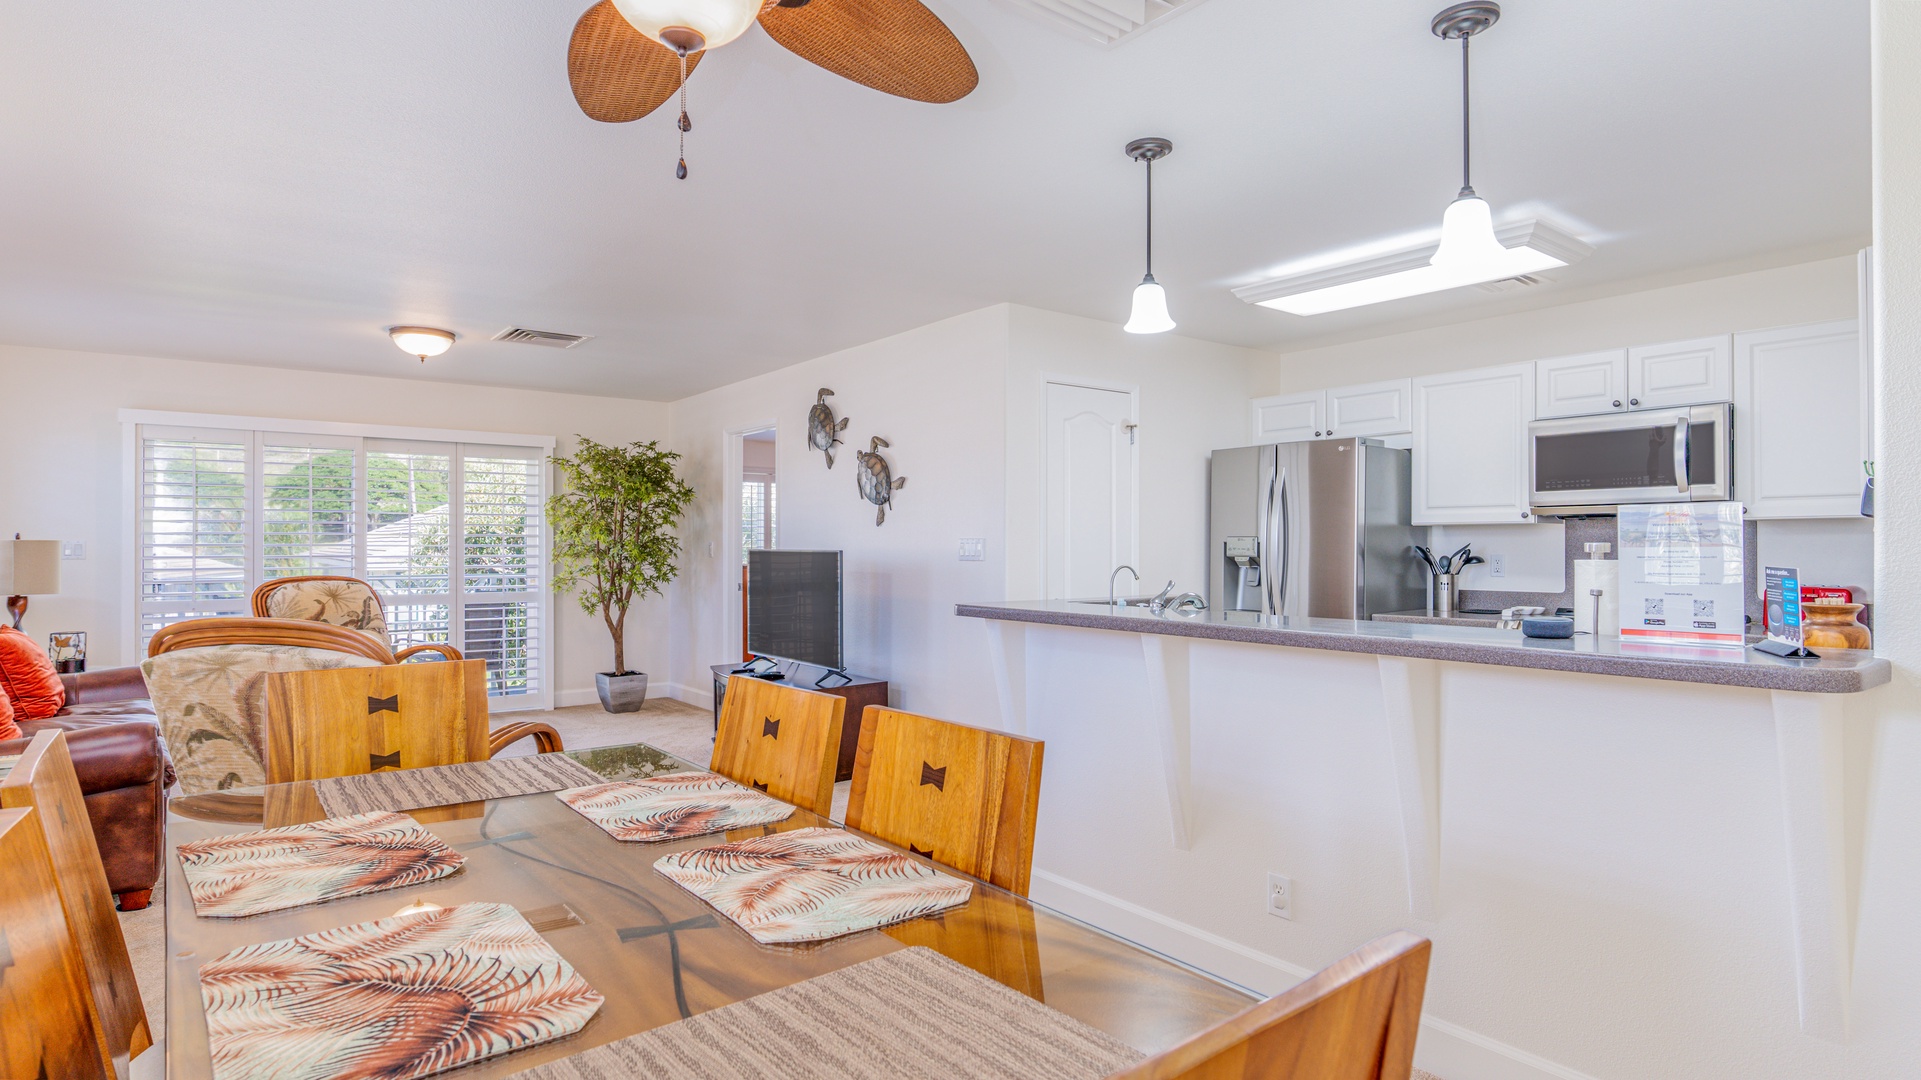 Kapolei Vacation Rentals, Ko Olina Kai 1057B - Enjoy a meal at the dining table or a game of cards.